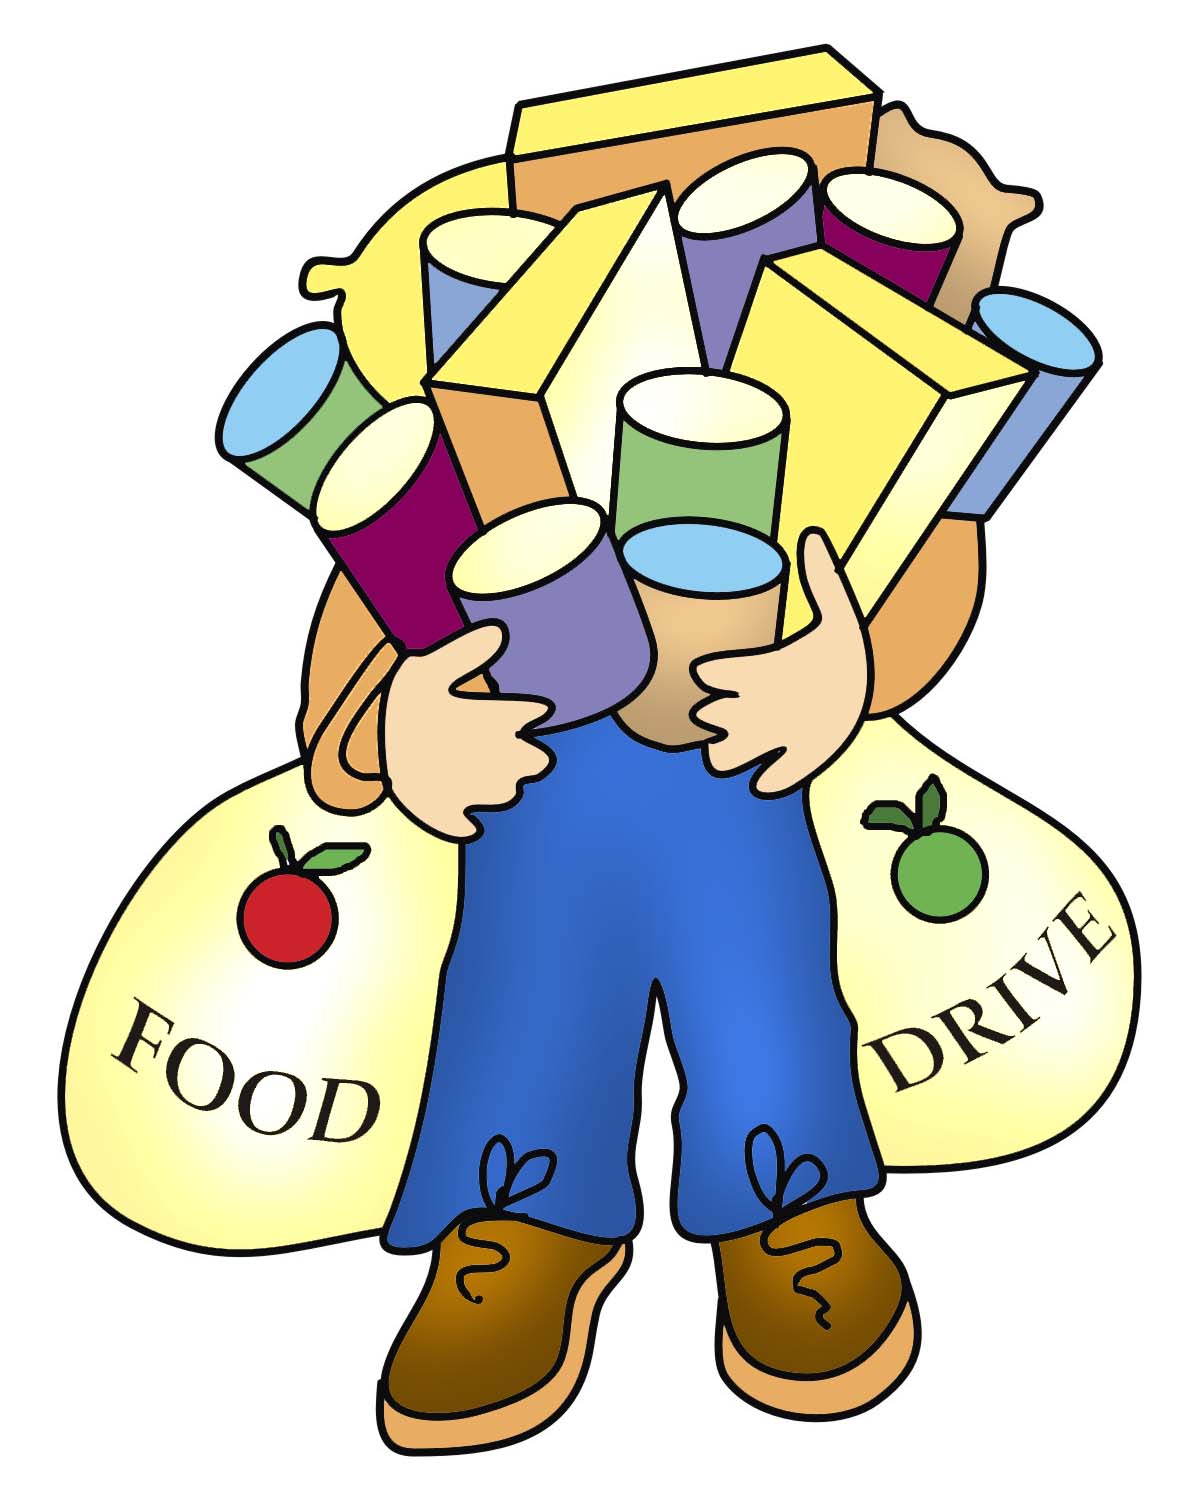 Canned-Food Drive Clip Art